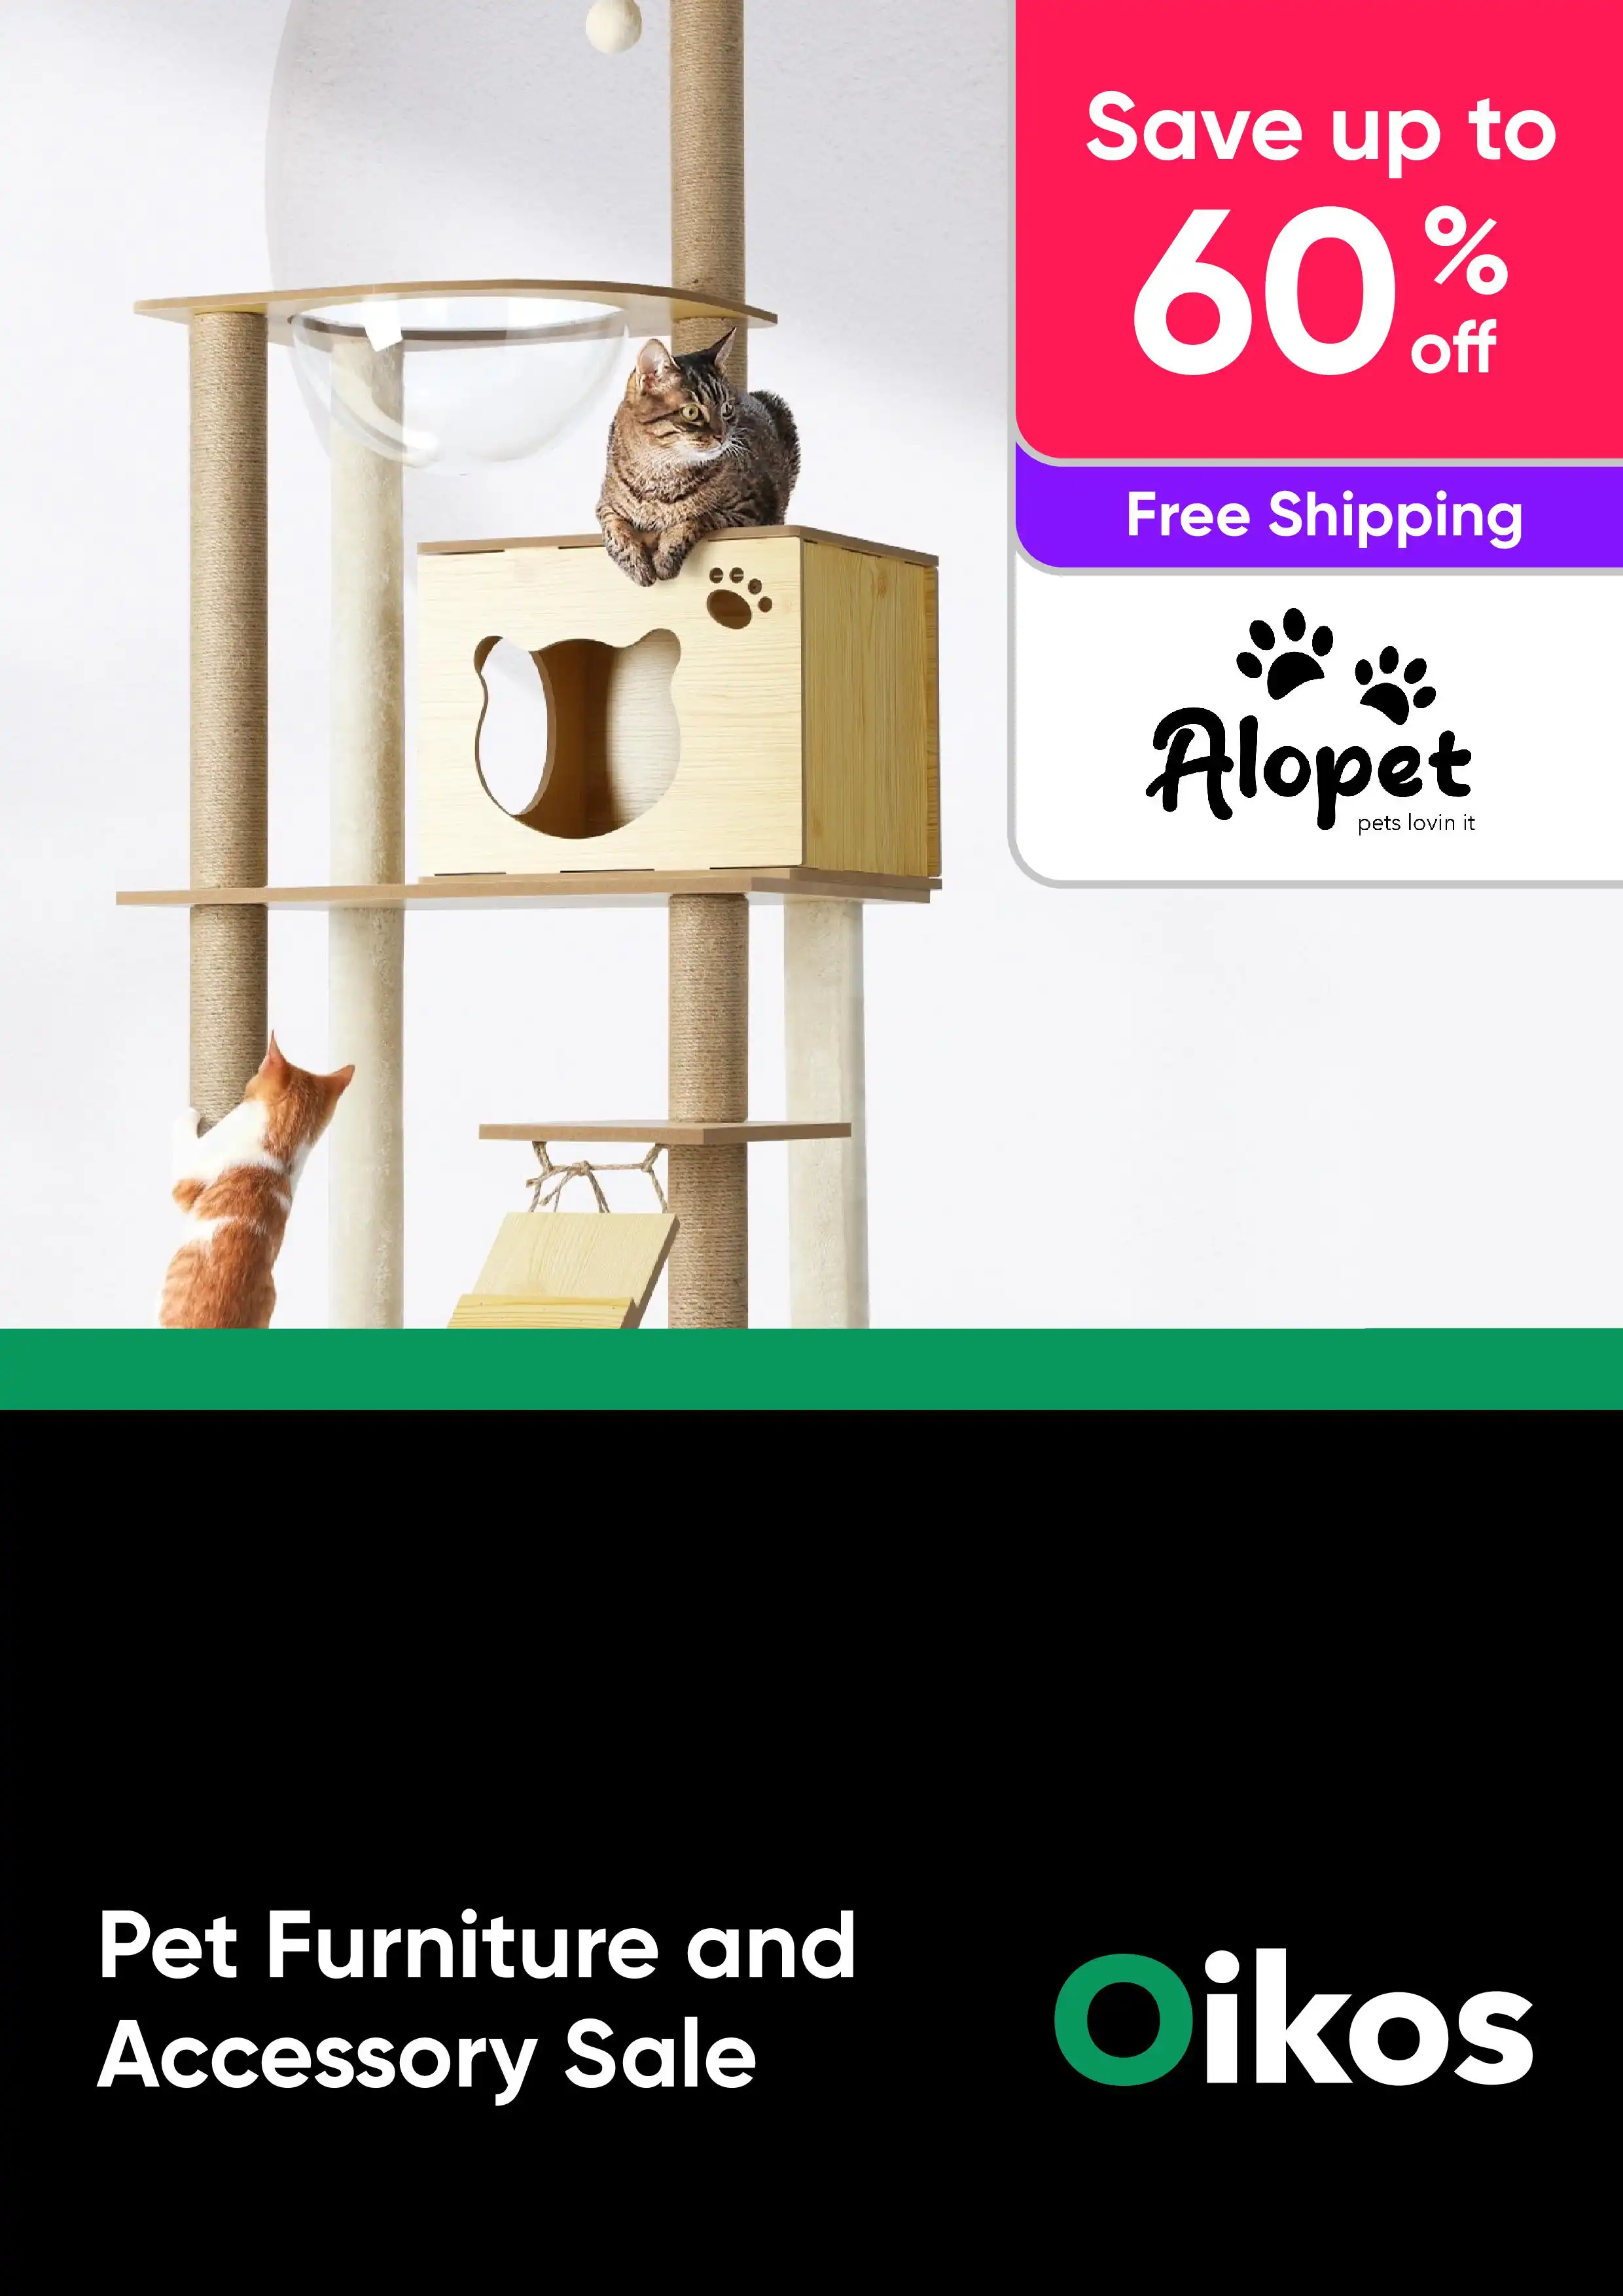 Pet Furniture and Accessory Sale - Kennels, Scratching Towers, Coops and More - Alopet - Up to 60% Off 